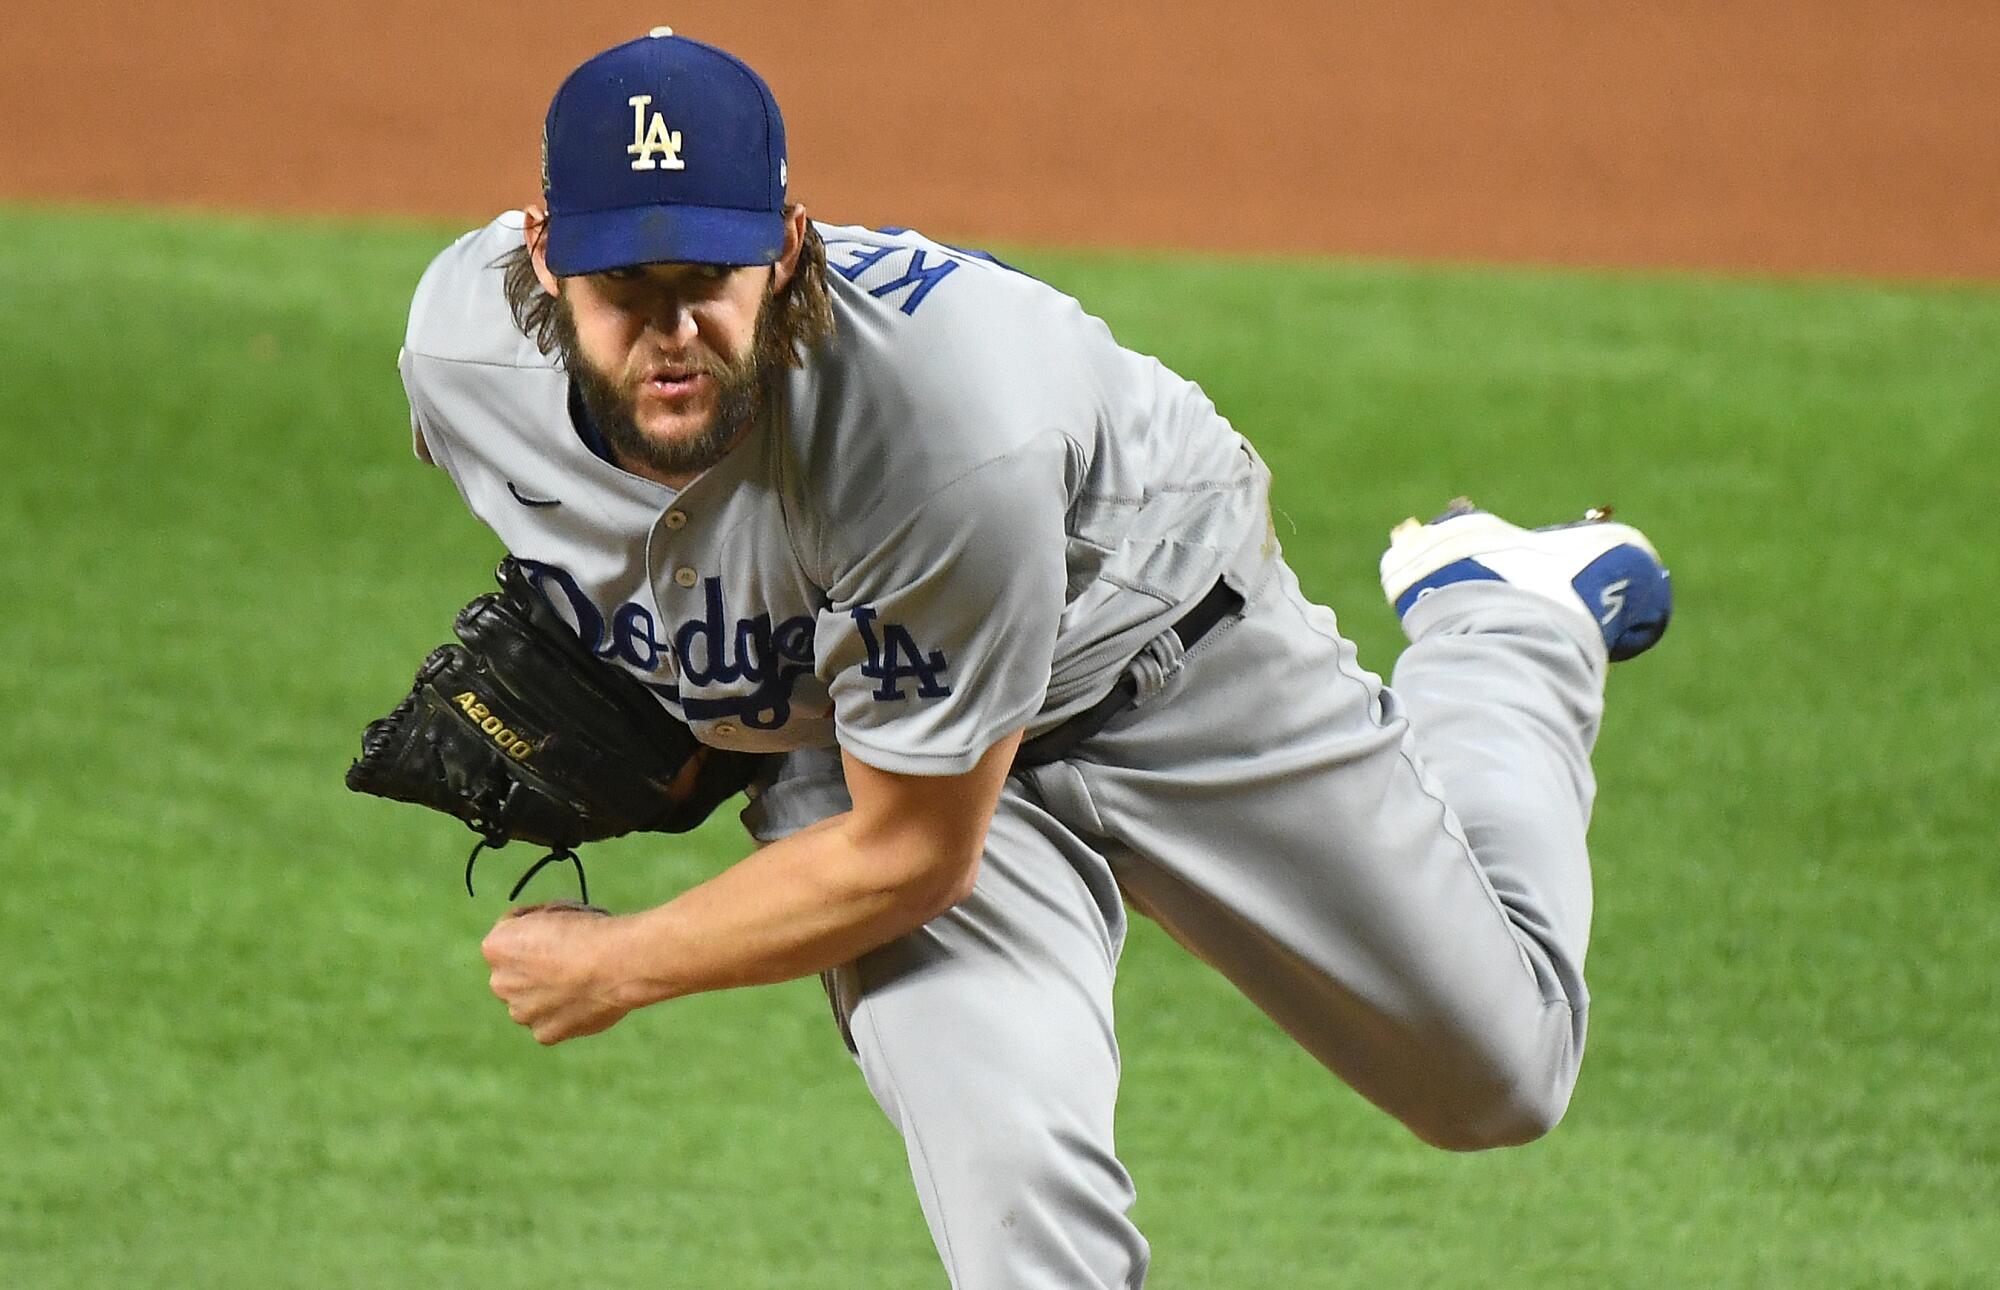 Clayton Kershaw throws a pitch against the Rays during Game 5 of the World Series.